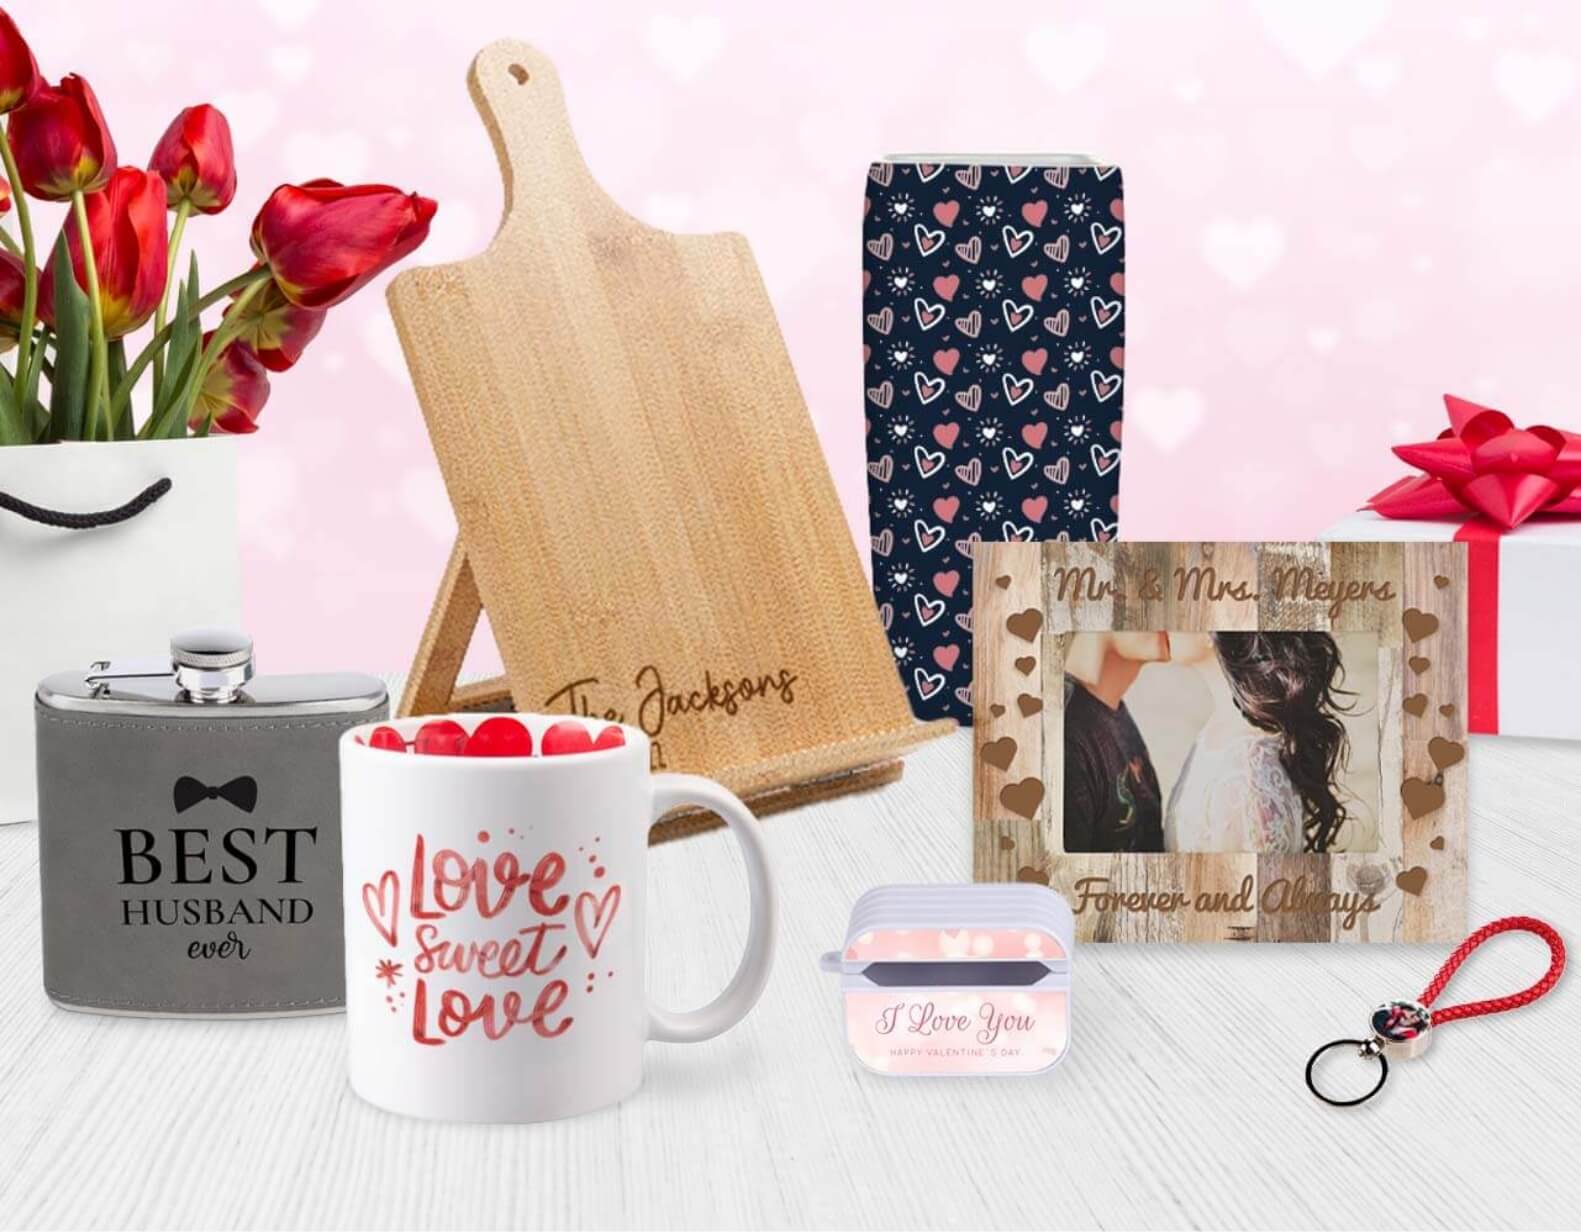 Assortment of personalized gifts for valentine's day, photo frame, keychain, mug, cutting board, and hip flask